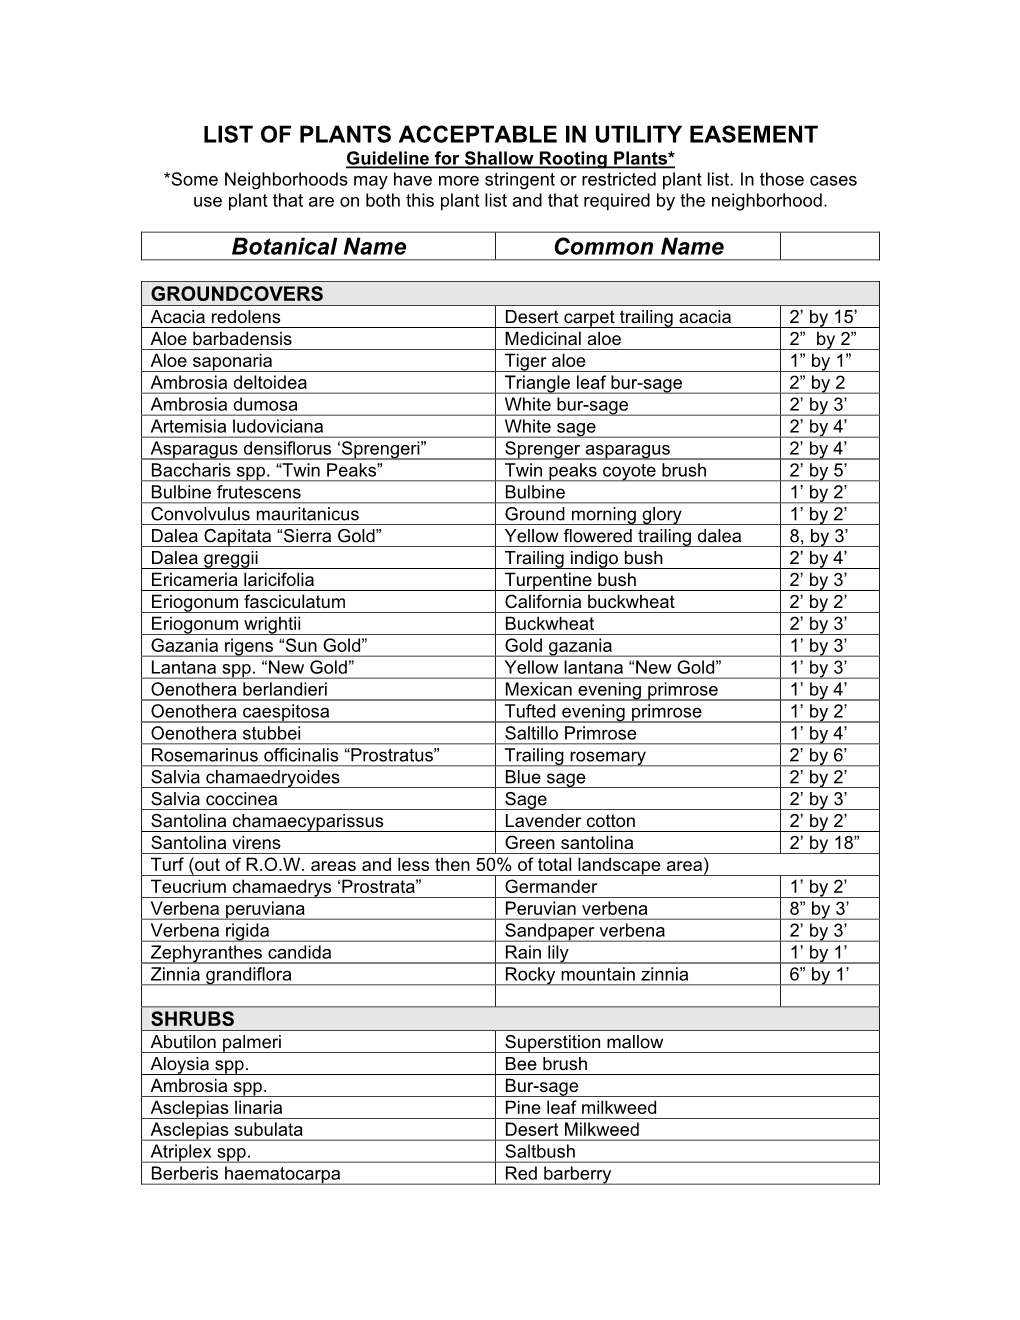 LIST of PLANTS ACCEPTABLE in UTILITY EASEMENT Guideline for Shallow Rooting Plants* *Some Neighborhoods May Have More Stringent Or Restricted Plant List